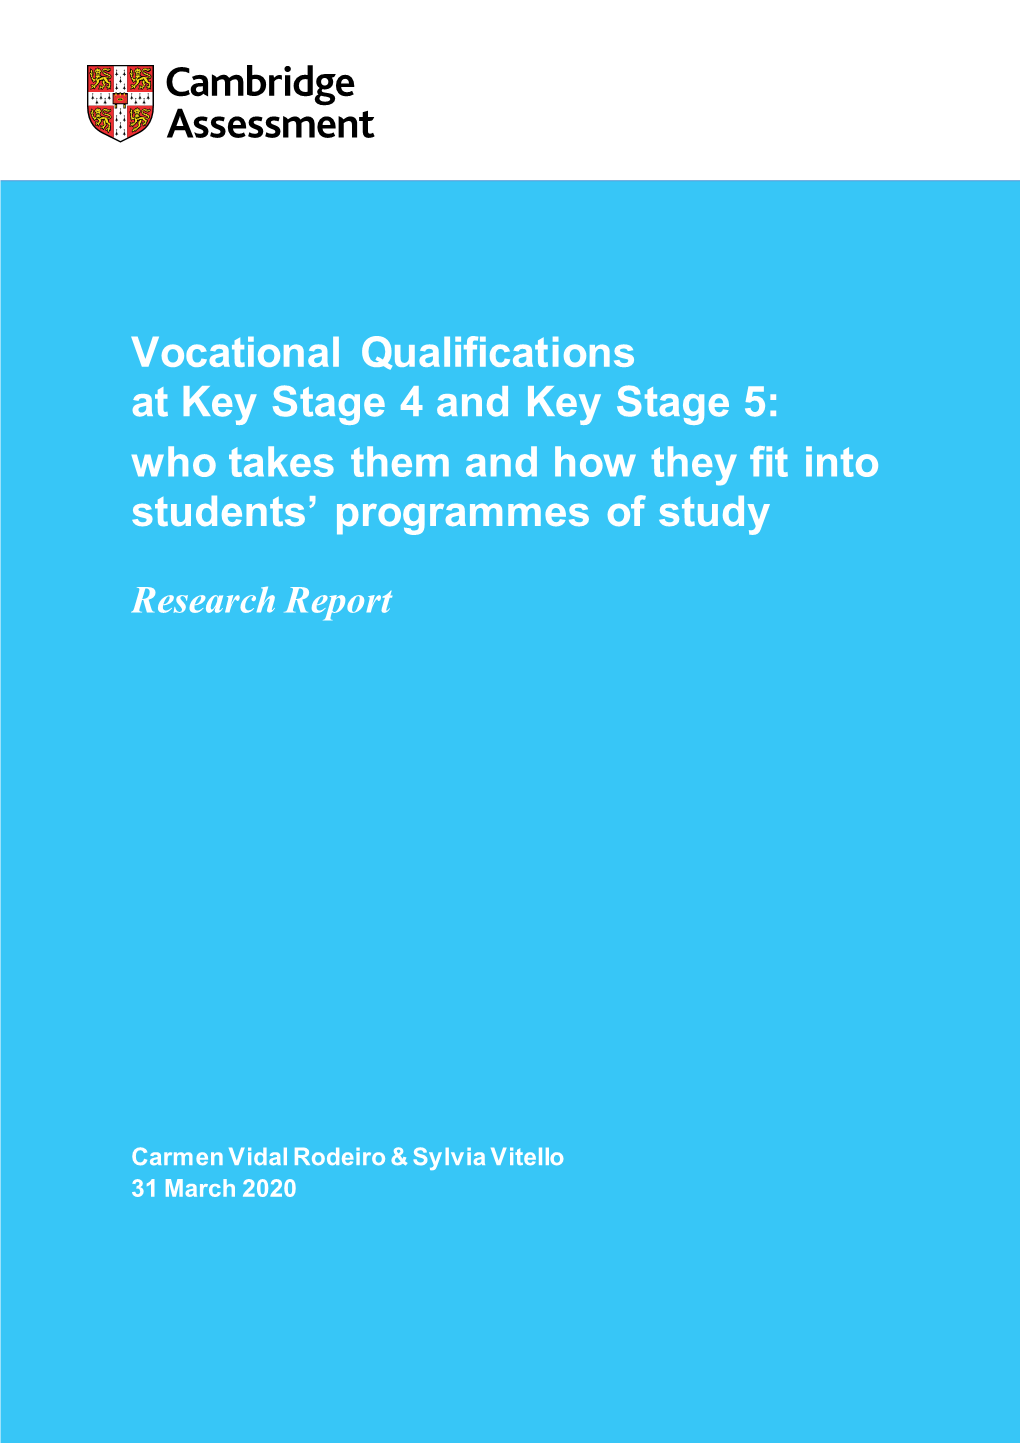 Vocational Qualifications at Key Stage 4 and Key Stage 5: Who Takes Them and How They Fit Into Students’ Programmes of Study